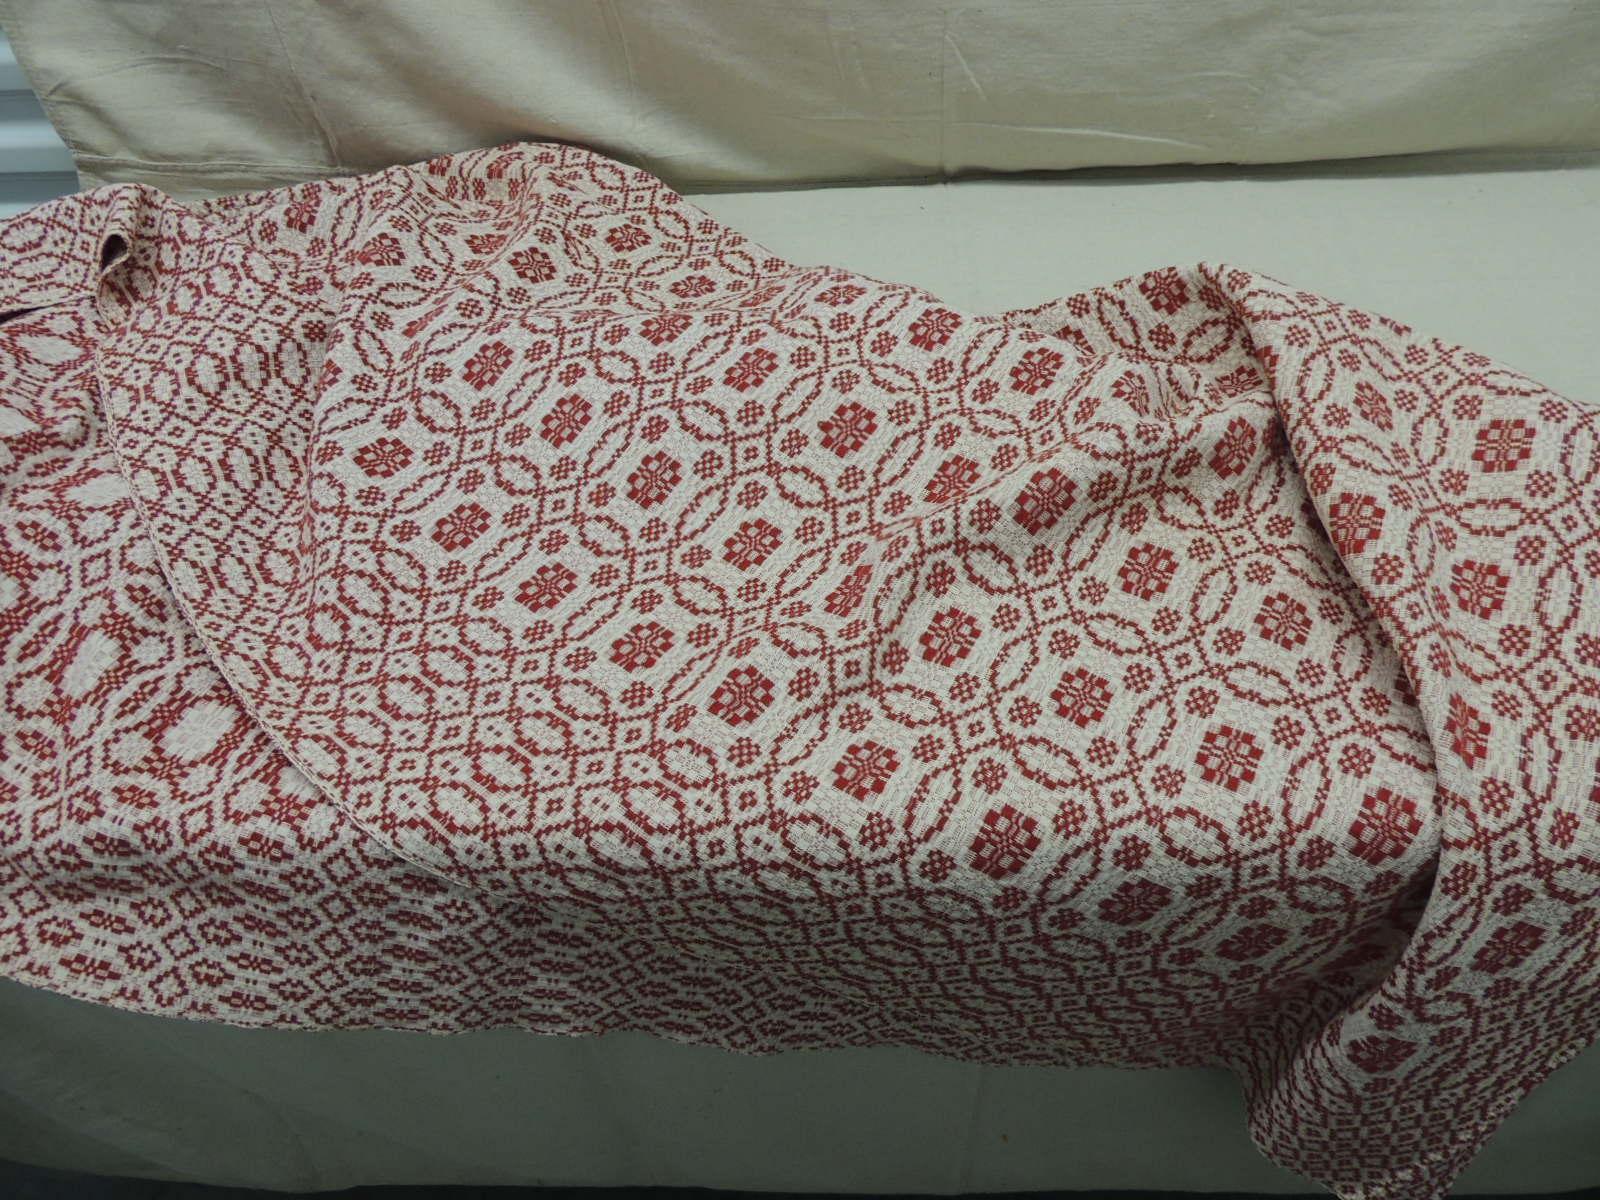 Hand-Crafted Red and White Americana Jacquard Woven Blanket/Coverlet